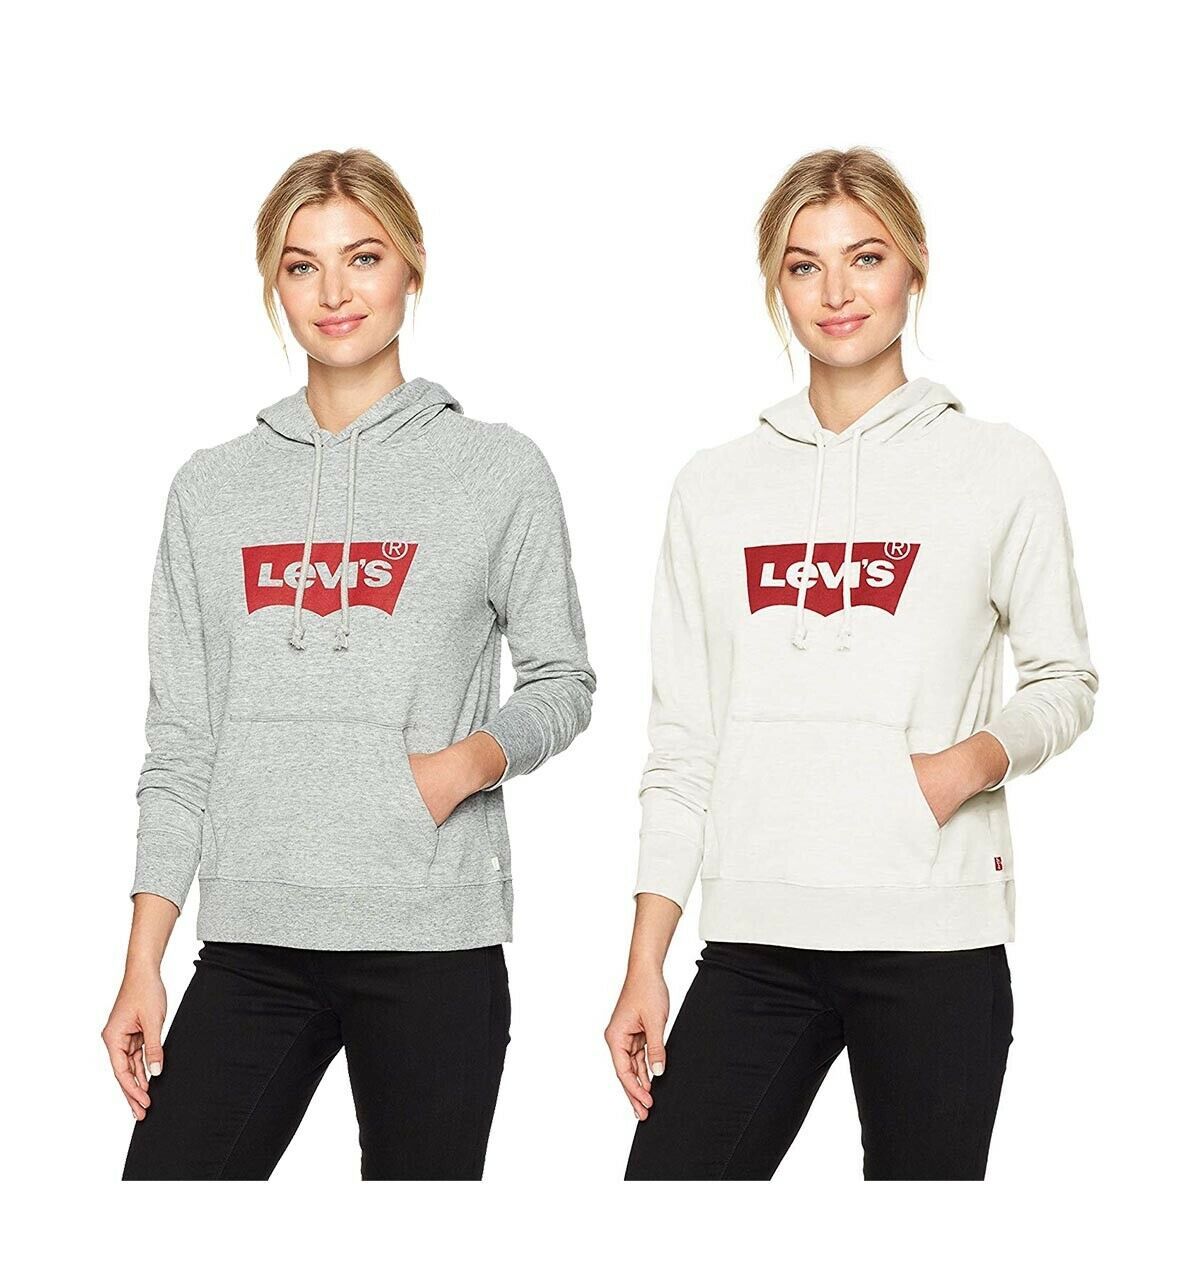 NWT Women's LEVI'S Classic Logo Sleeve Hoodie Pull Over White Grey 359370003